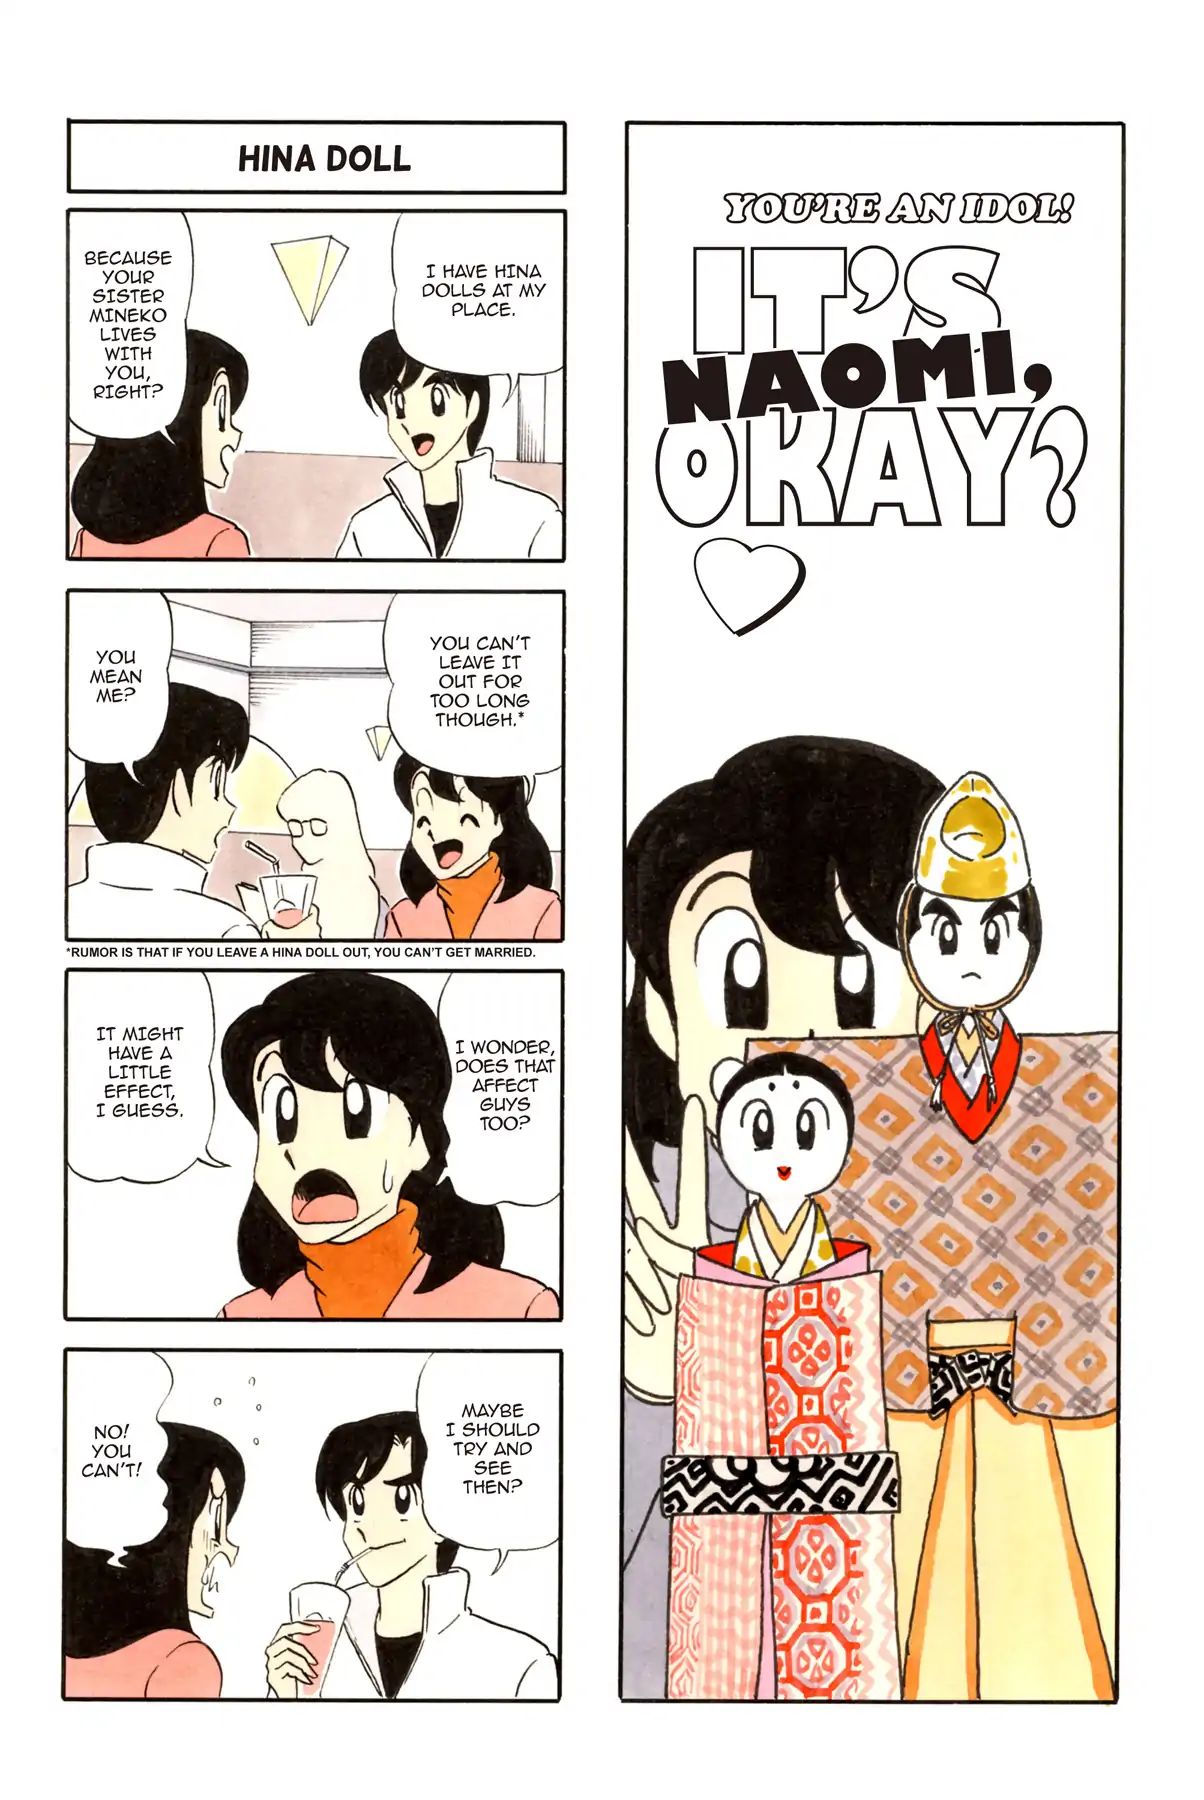 It's Naomi, Okay? After 16 Chapter 9 #1